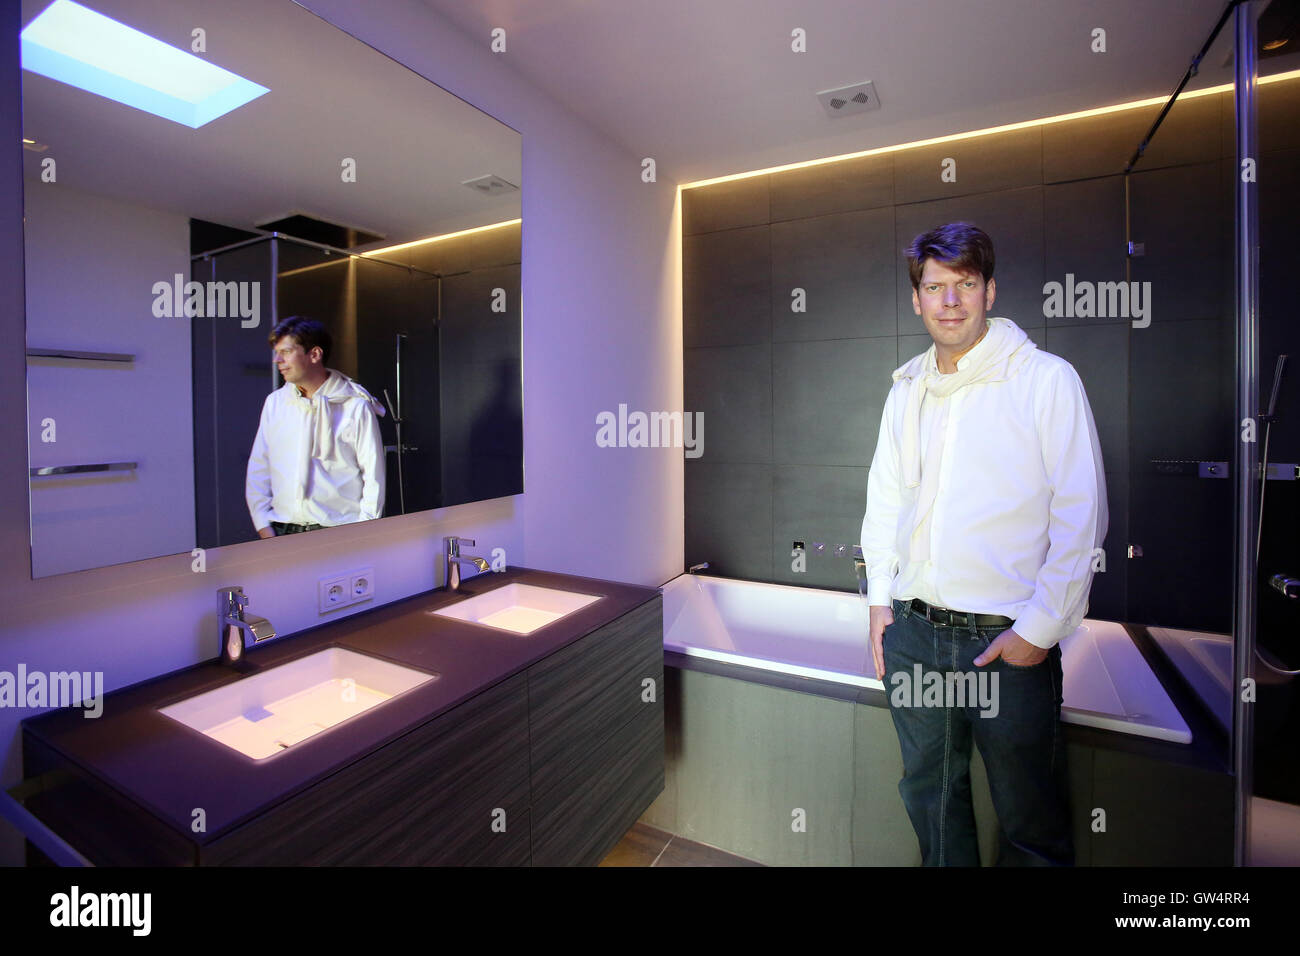 Hamburg, Germany. 01st Aug, 2016. Xing founder and building contractor of the 'Apartimentum, ' Lars Hinrichs, stands in the bathroom of 260-square-meter apartment where the bathwater can be drawn via tablet in the 'Apartimentum' in Hamburg, Germany, 01 August 2016. The 'Apartimentum' is a networked house in the district of Rotherbaum where multiple functionalities, like entries or room temperature, can be controlled via smartphone of tablet - also from a distance. Photo: BODO MARKS/dpa/Alamy Live News Stock Photo